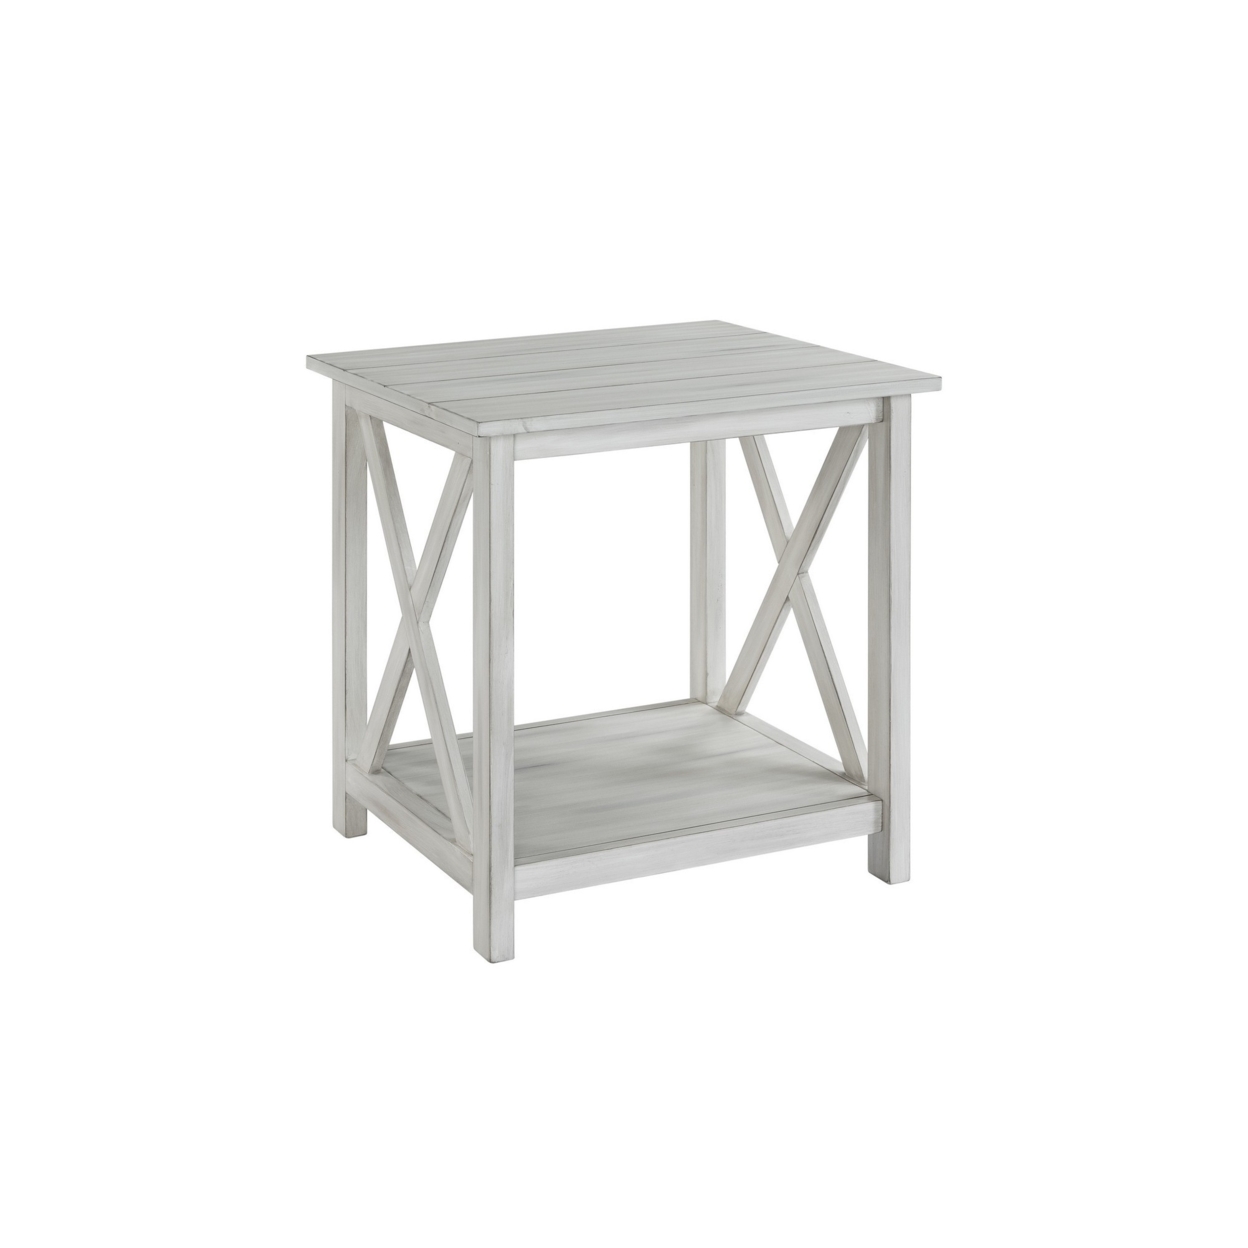 1 Open Shelf Wooden End Table With X Shaped Accents, White- Saltoro Sherpi